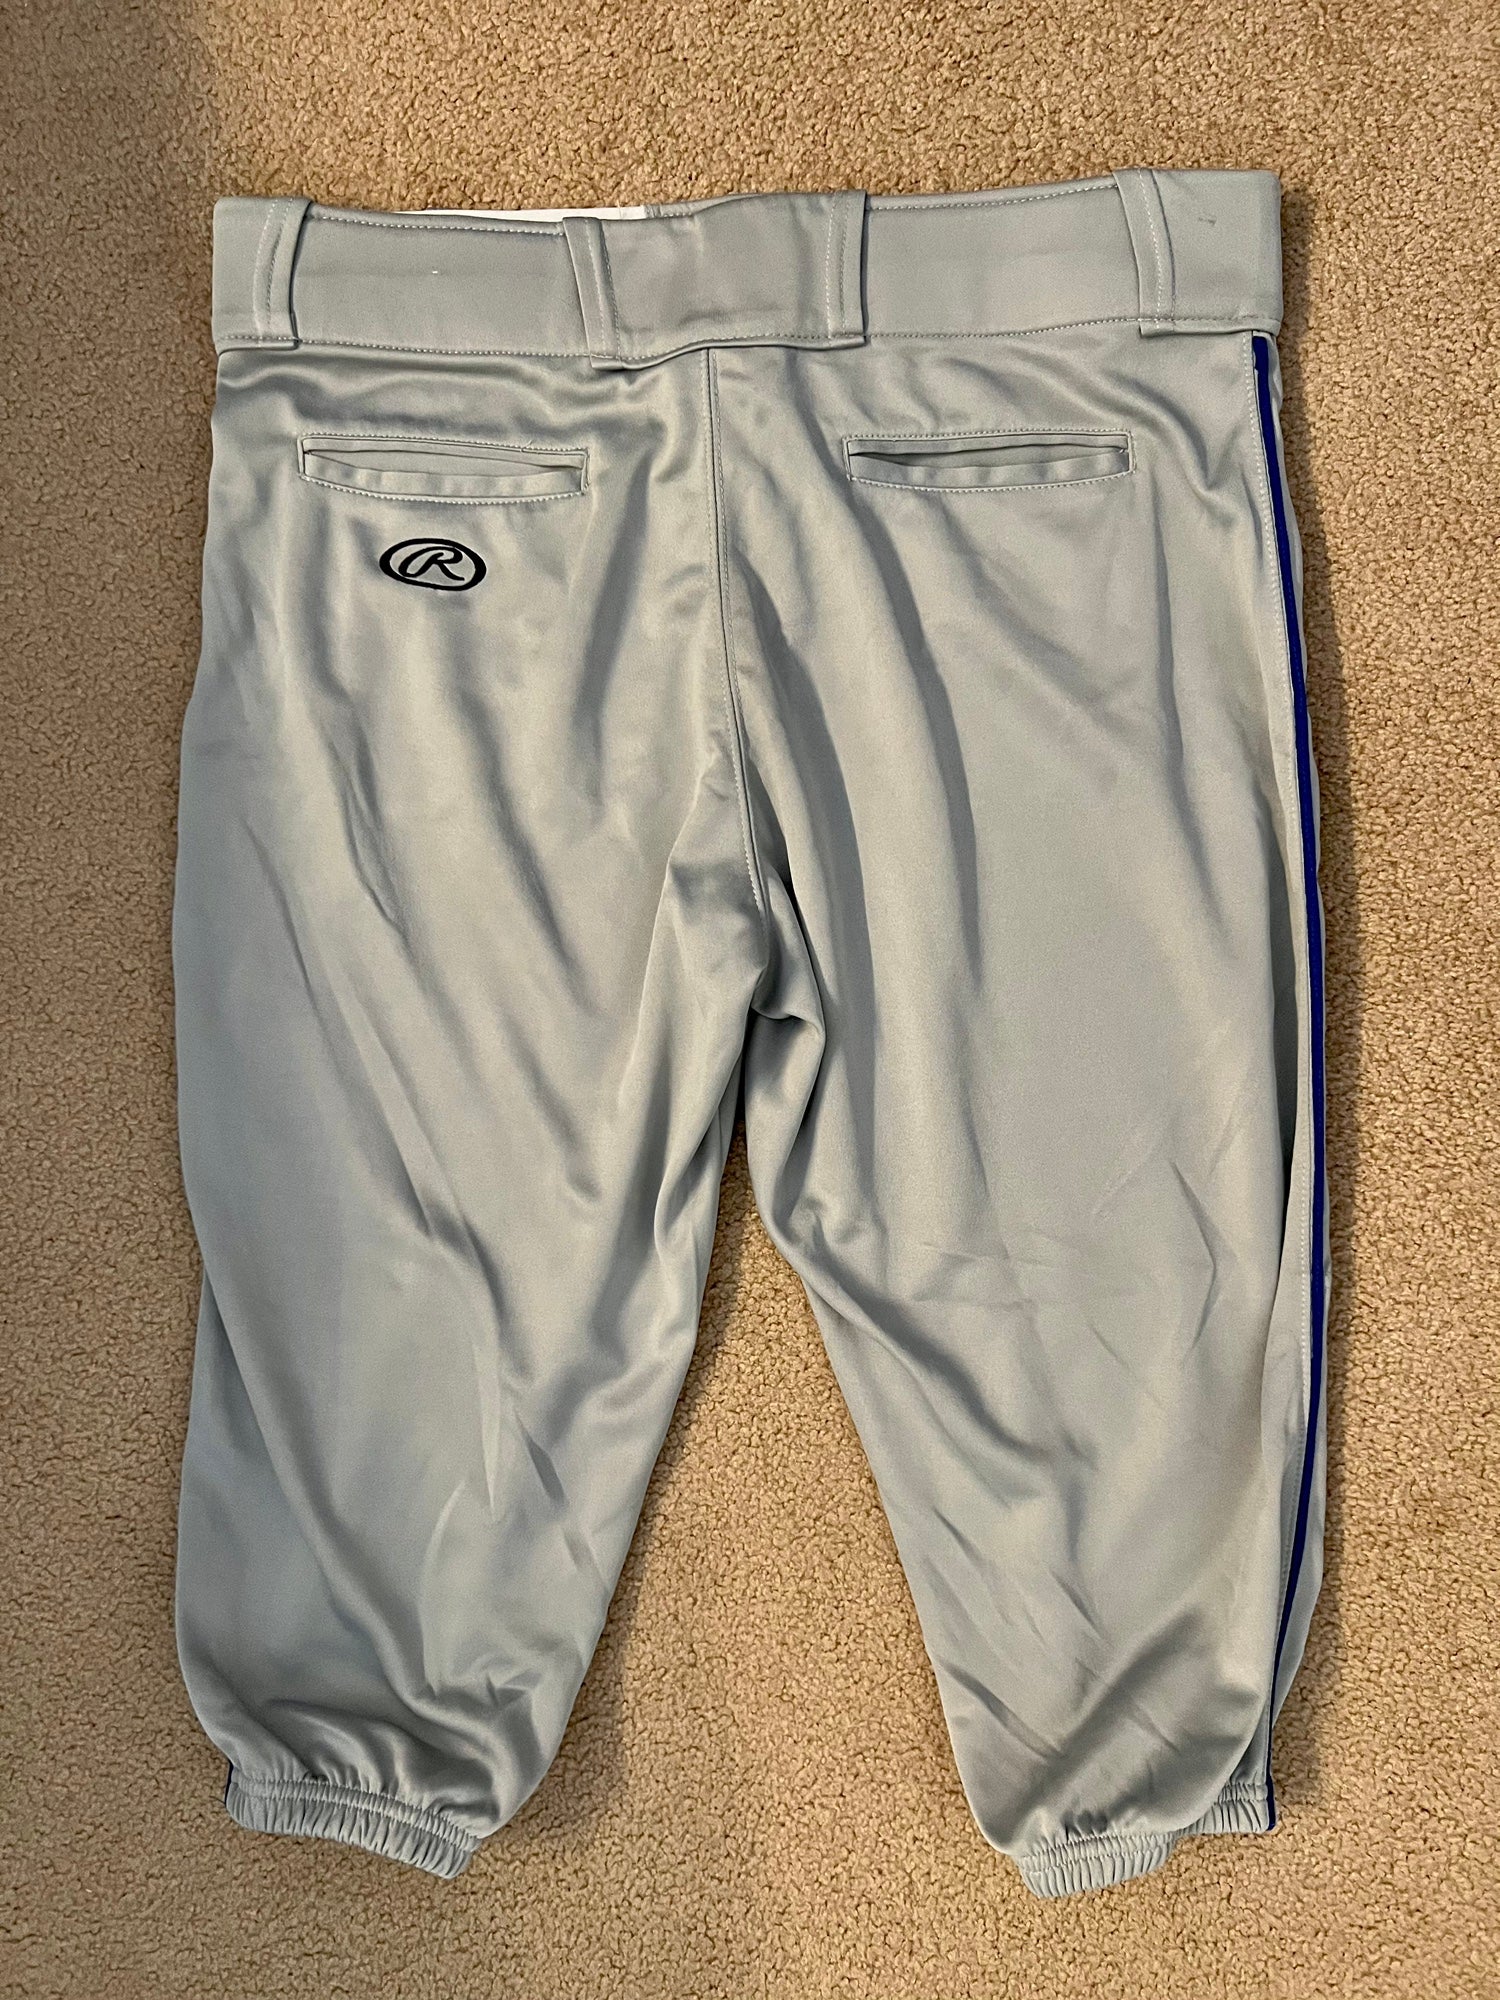 White Used Large Rawlings Knicker Game Pants with Royal Blue